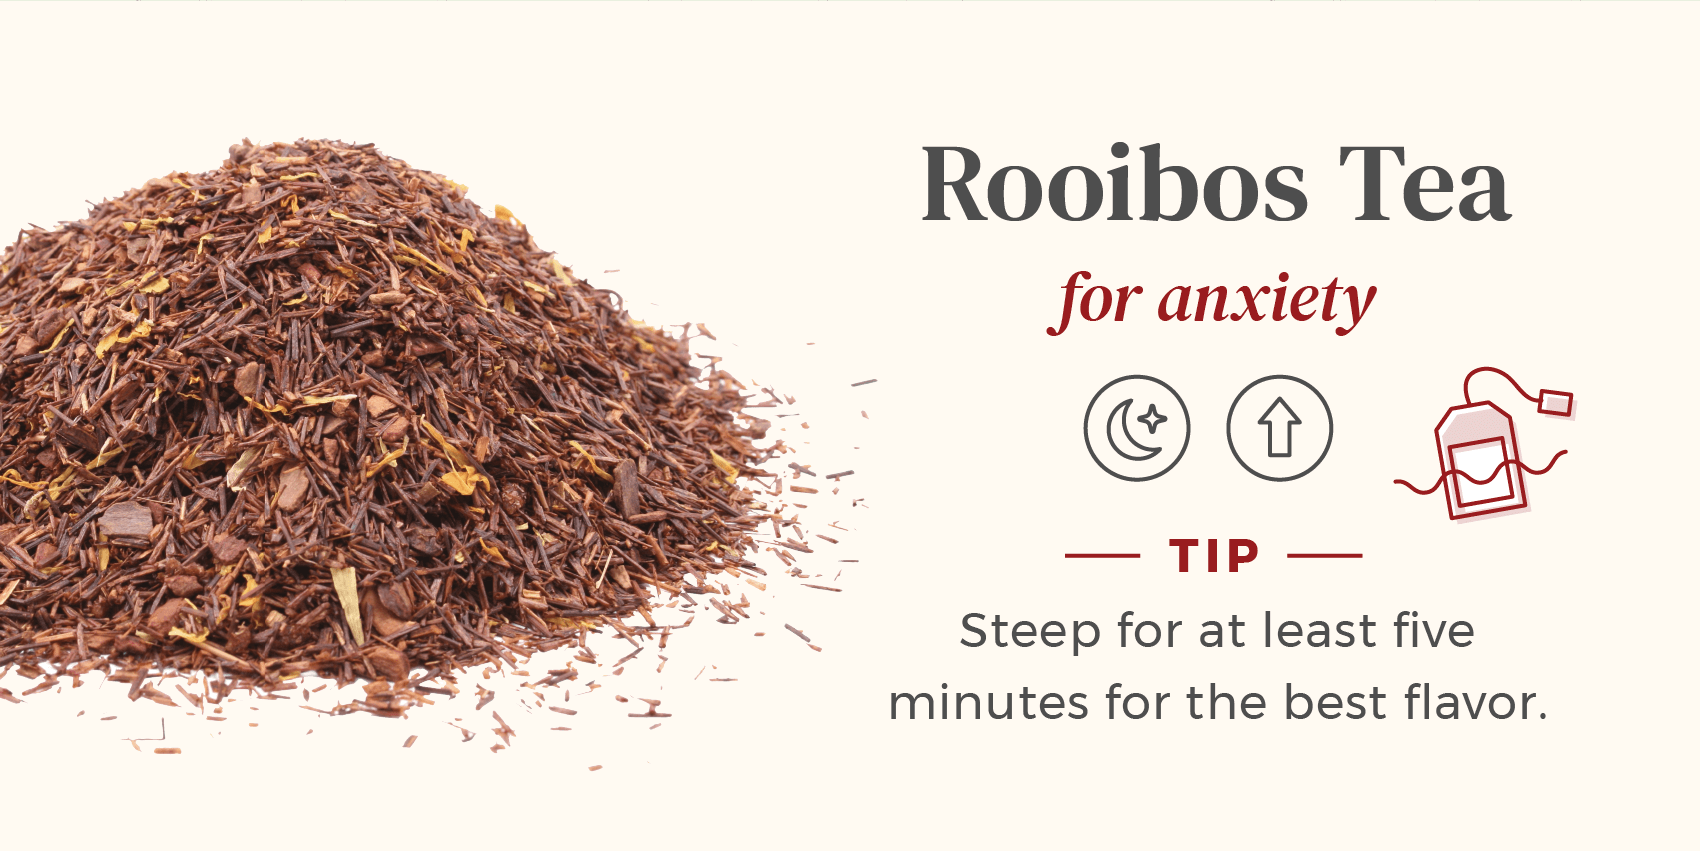 Pile of loose Rooibos tea used for anxiety, drink before a meal for best effects.